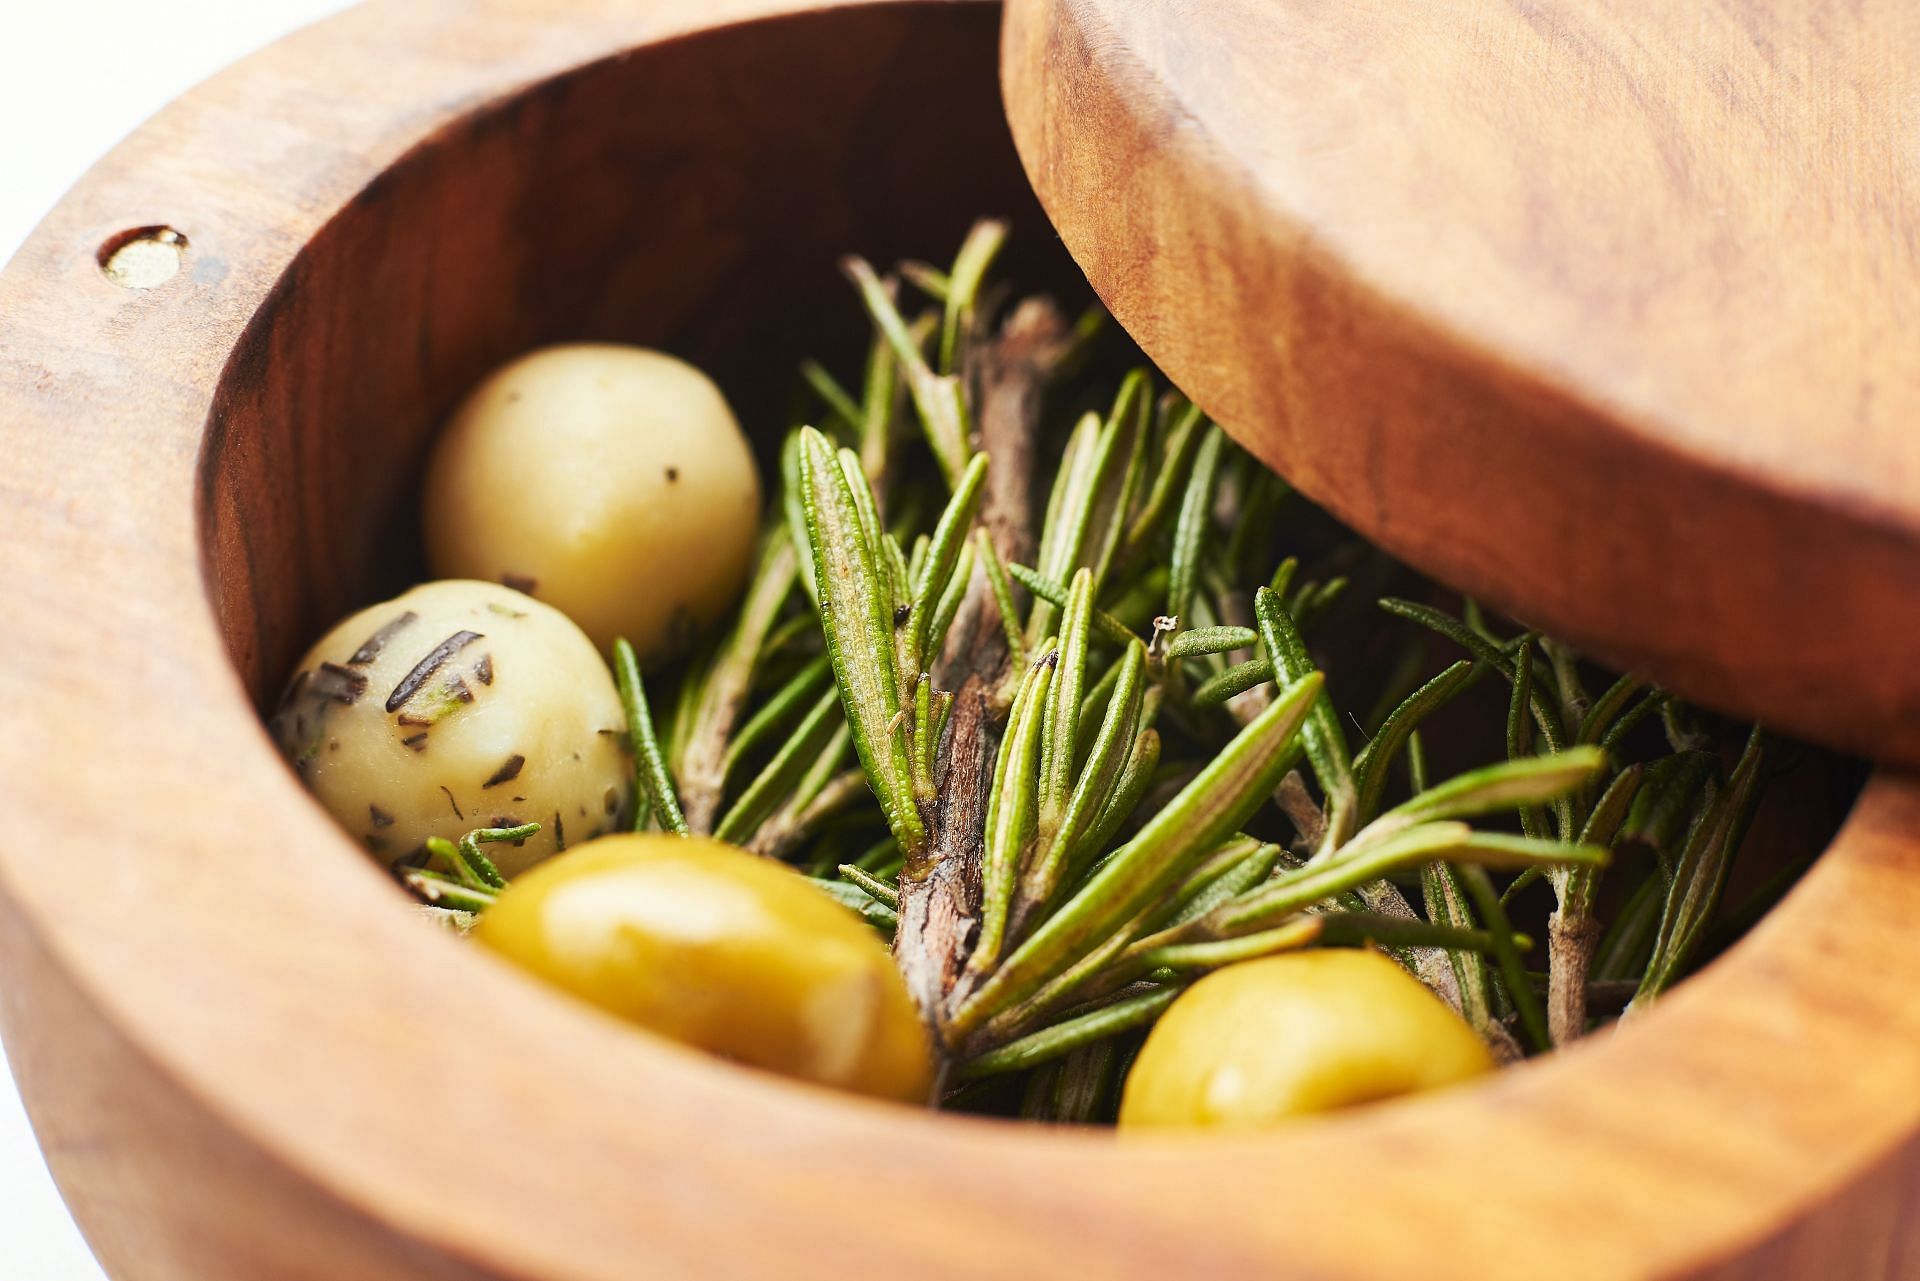 Green olives are often used along with herbs in Mediterranean cooking (Image via Unsplash/Daniel Agudelo)